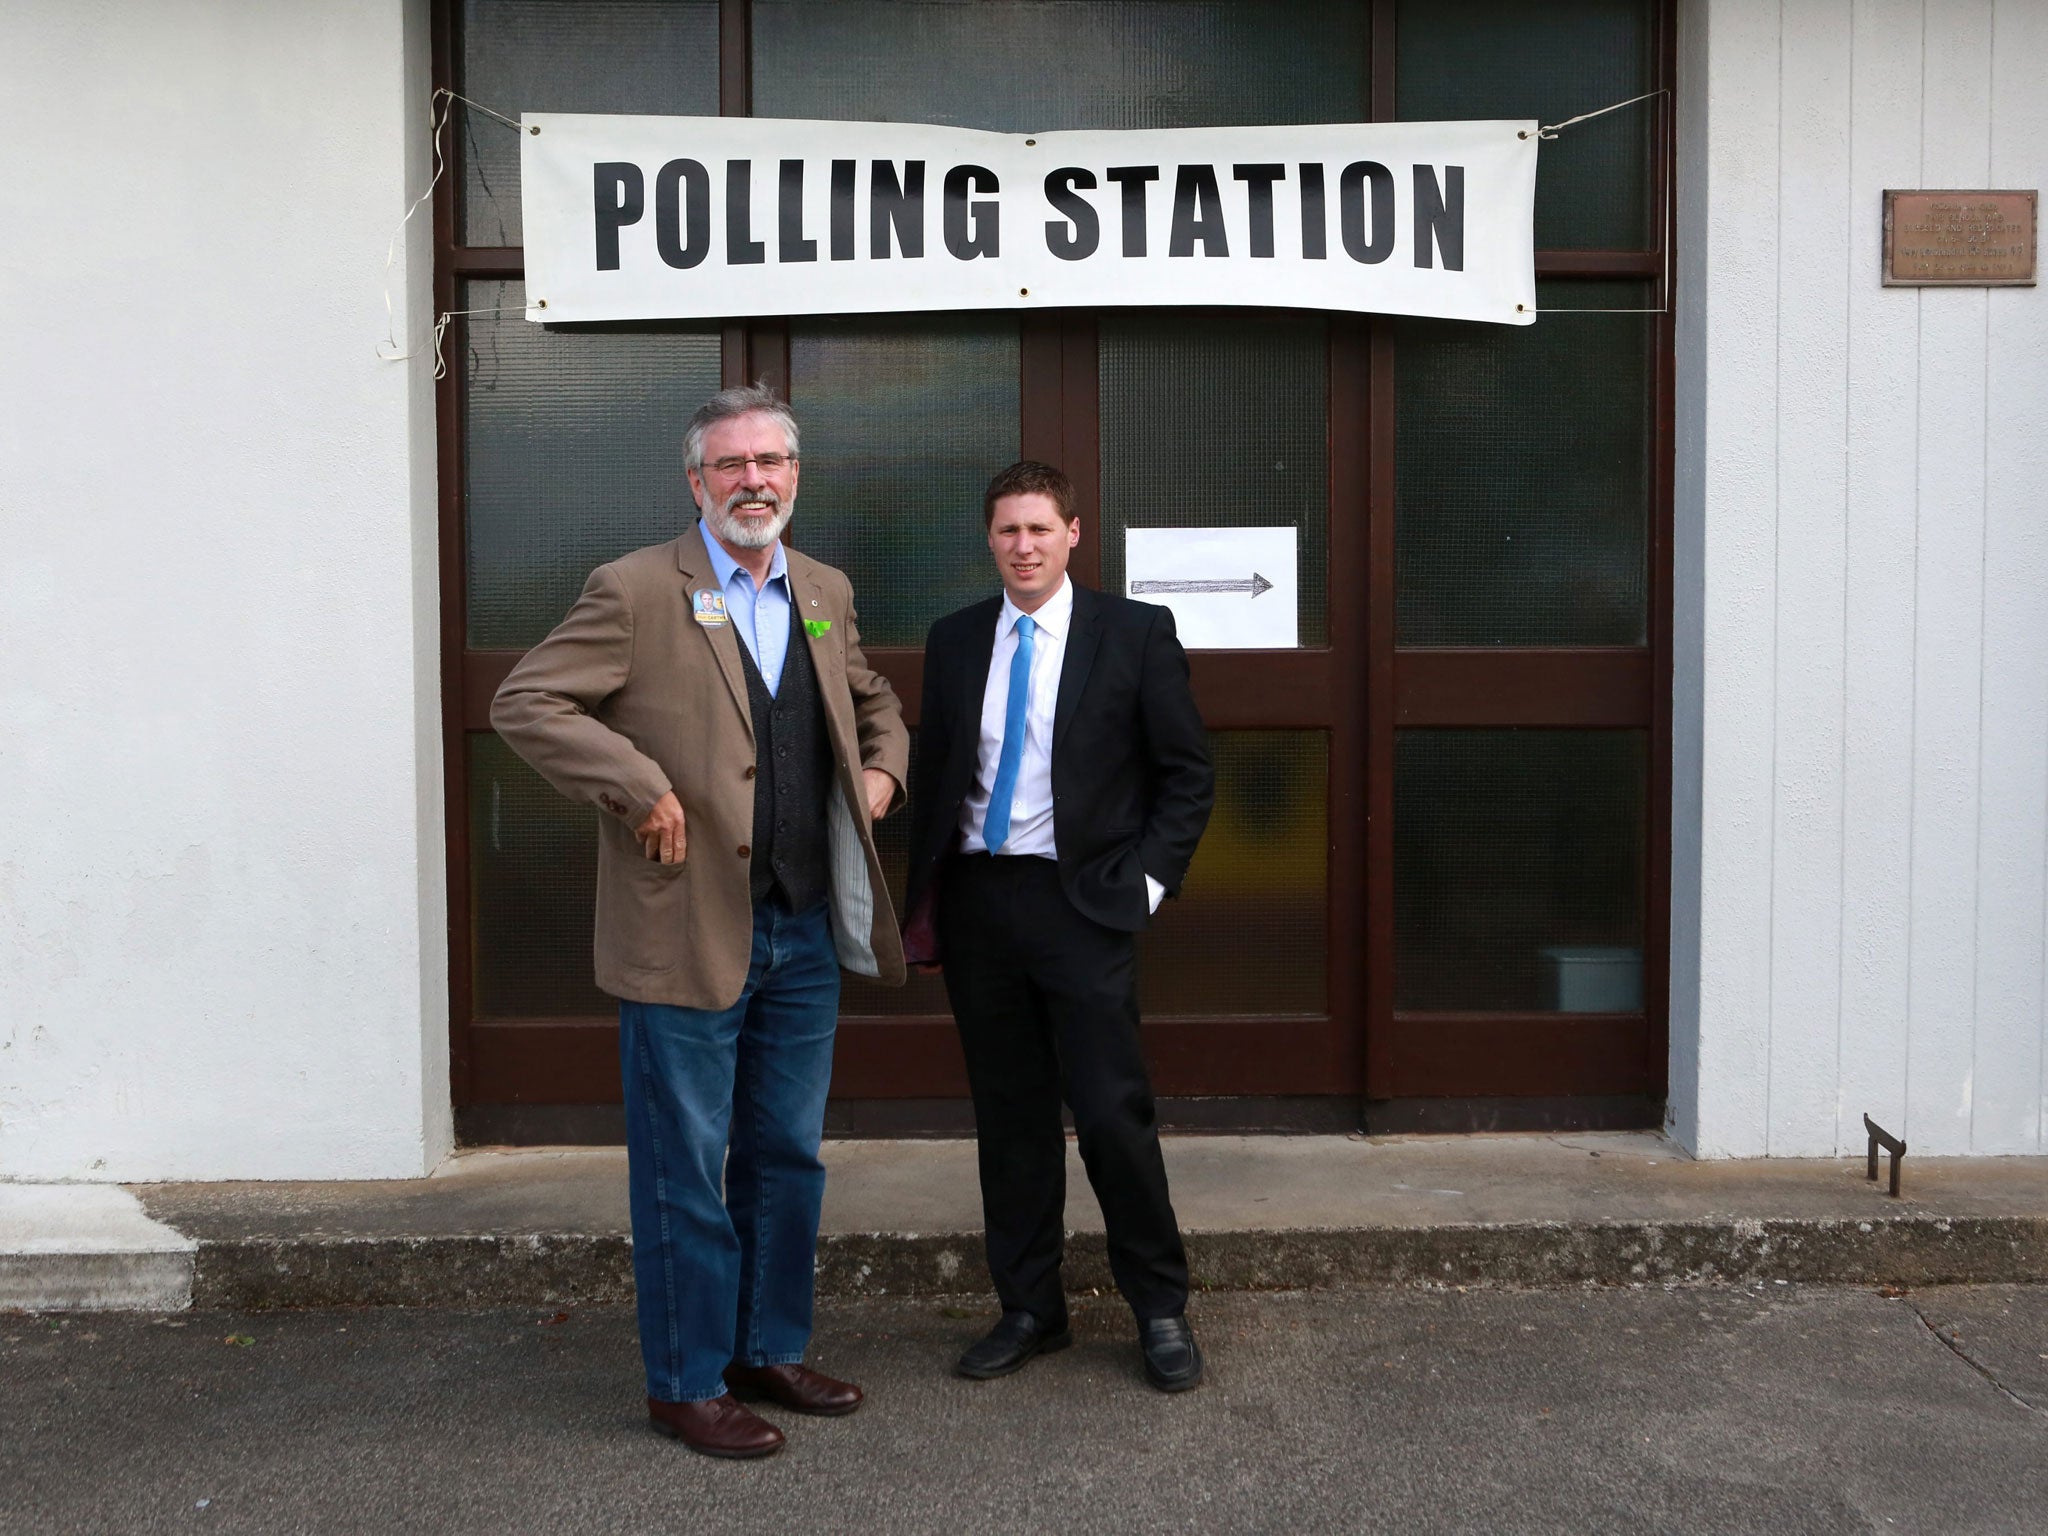 The Sinn Fein leader Gerry Adams with the party’s candidate Matt Carthy in County Louth